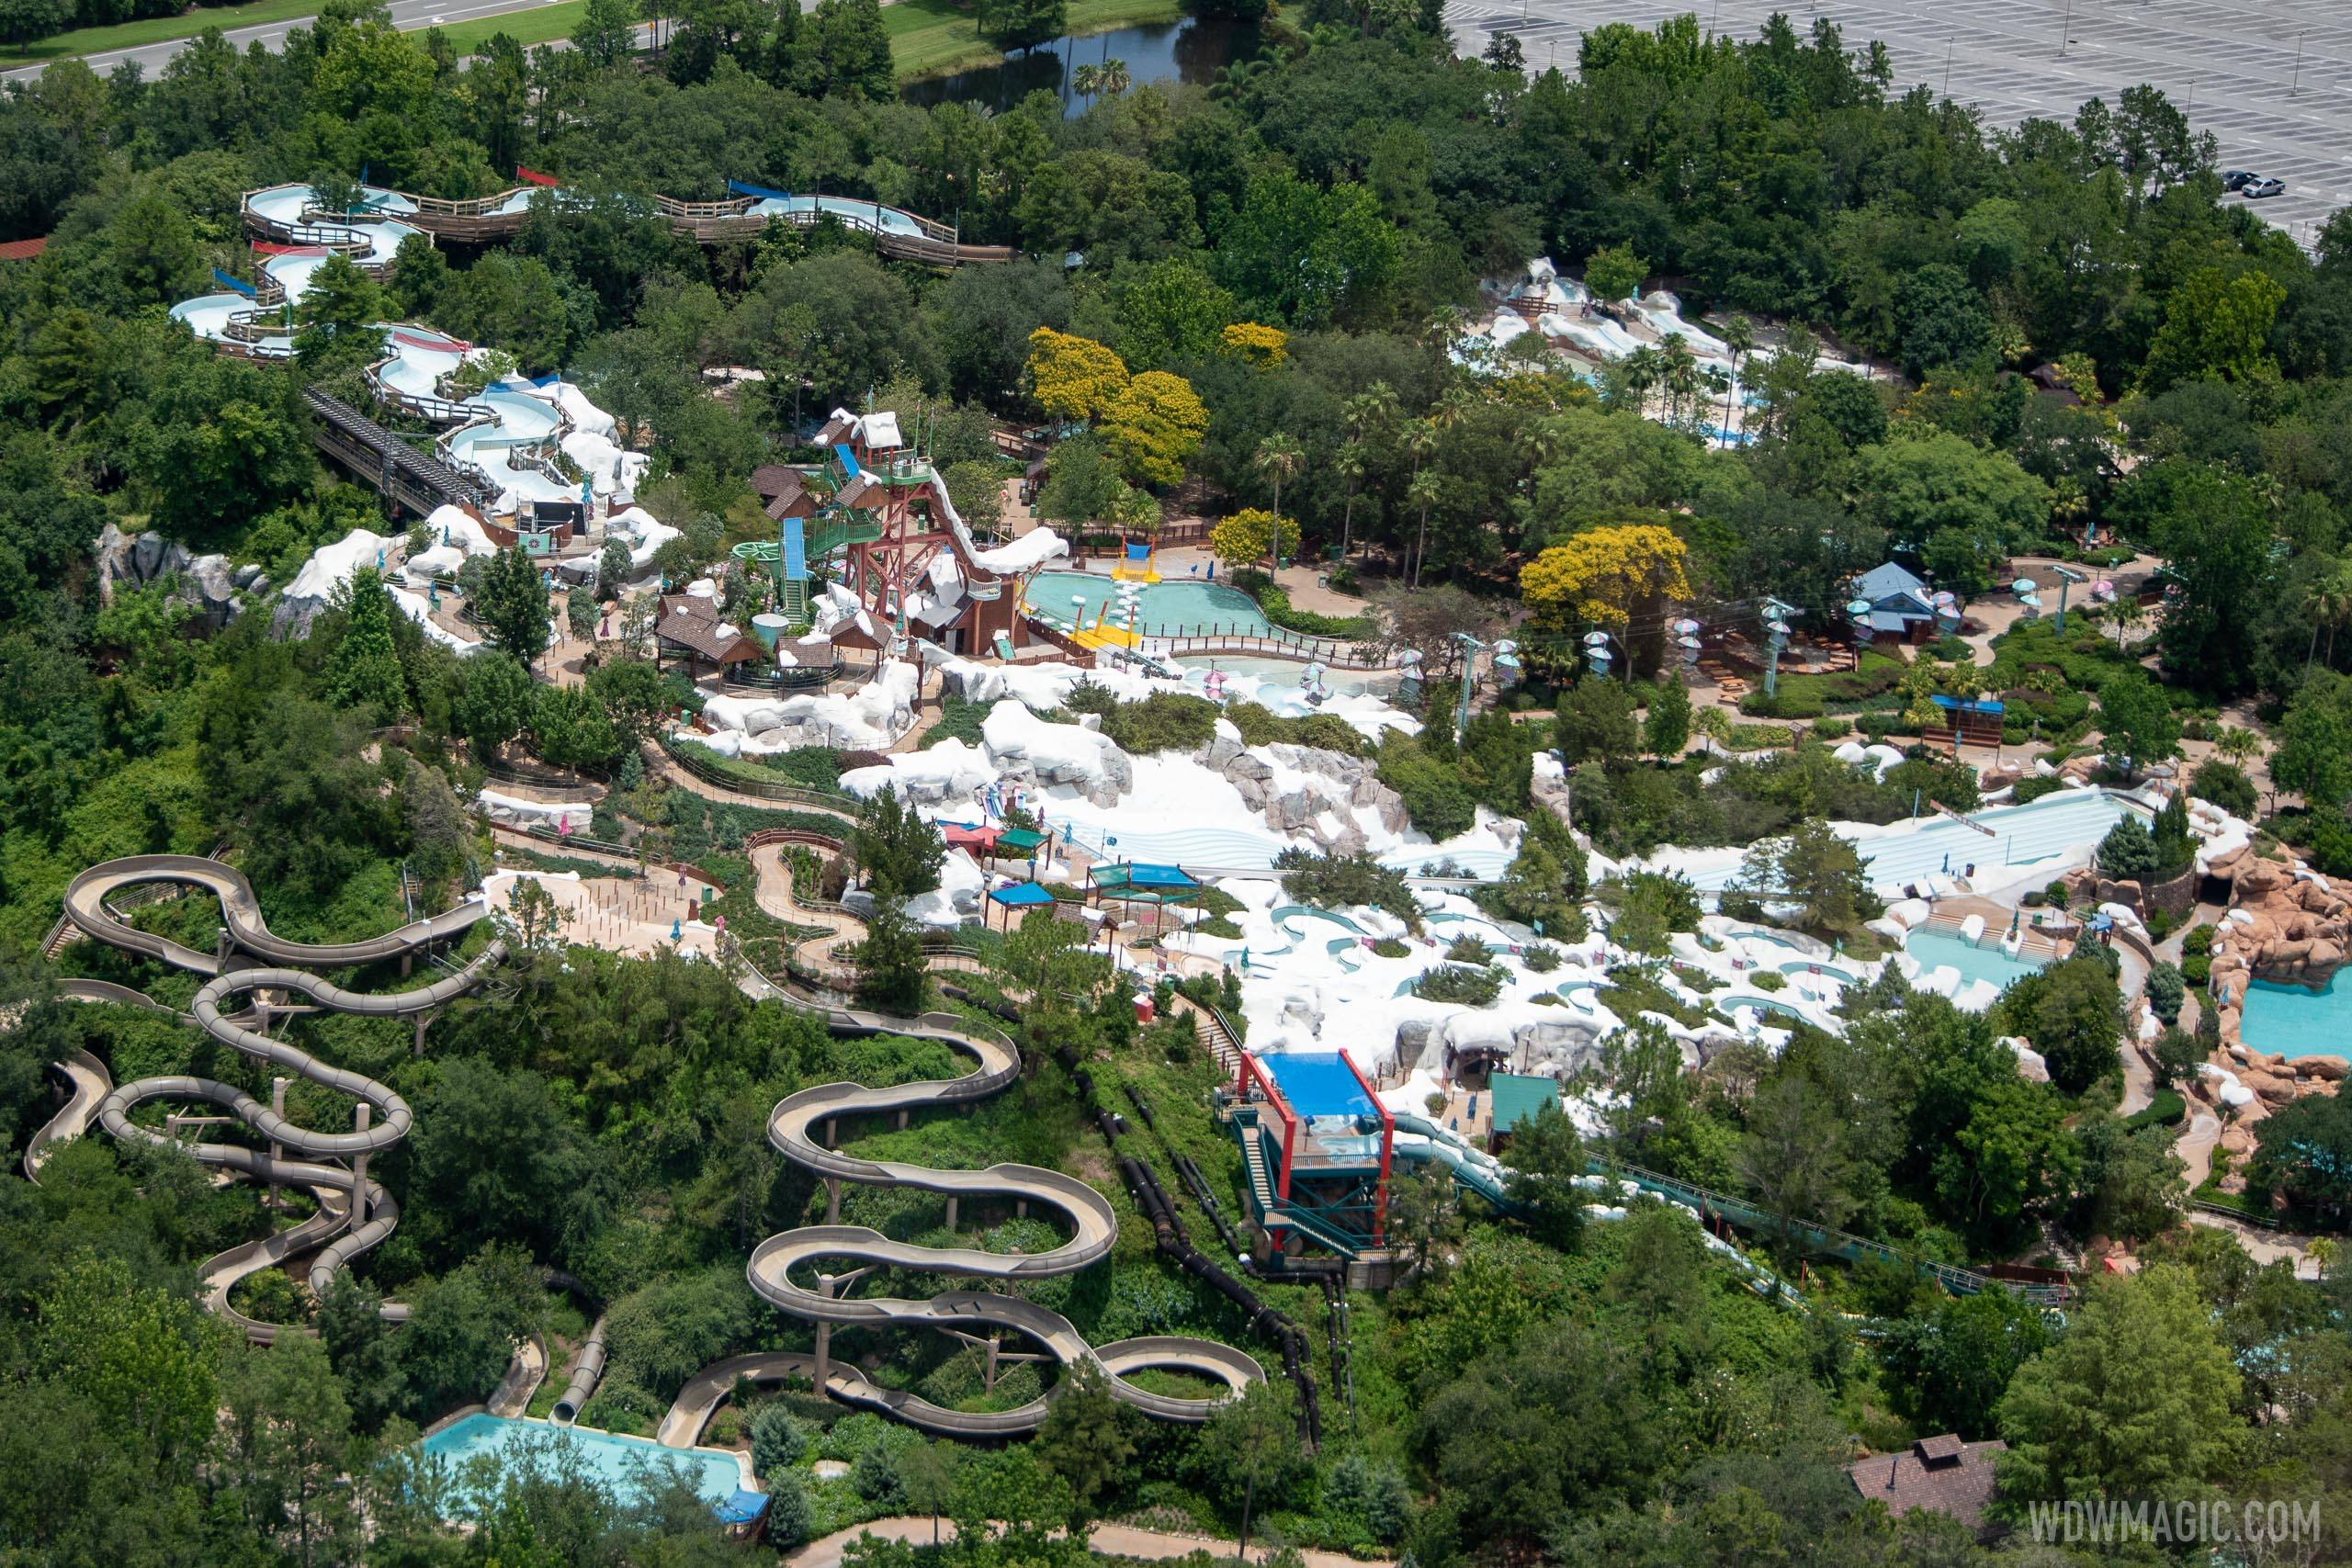 Blizzard Beach will be closed this weekend